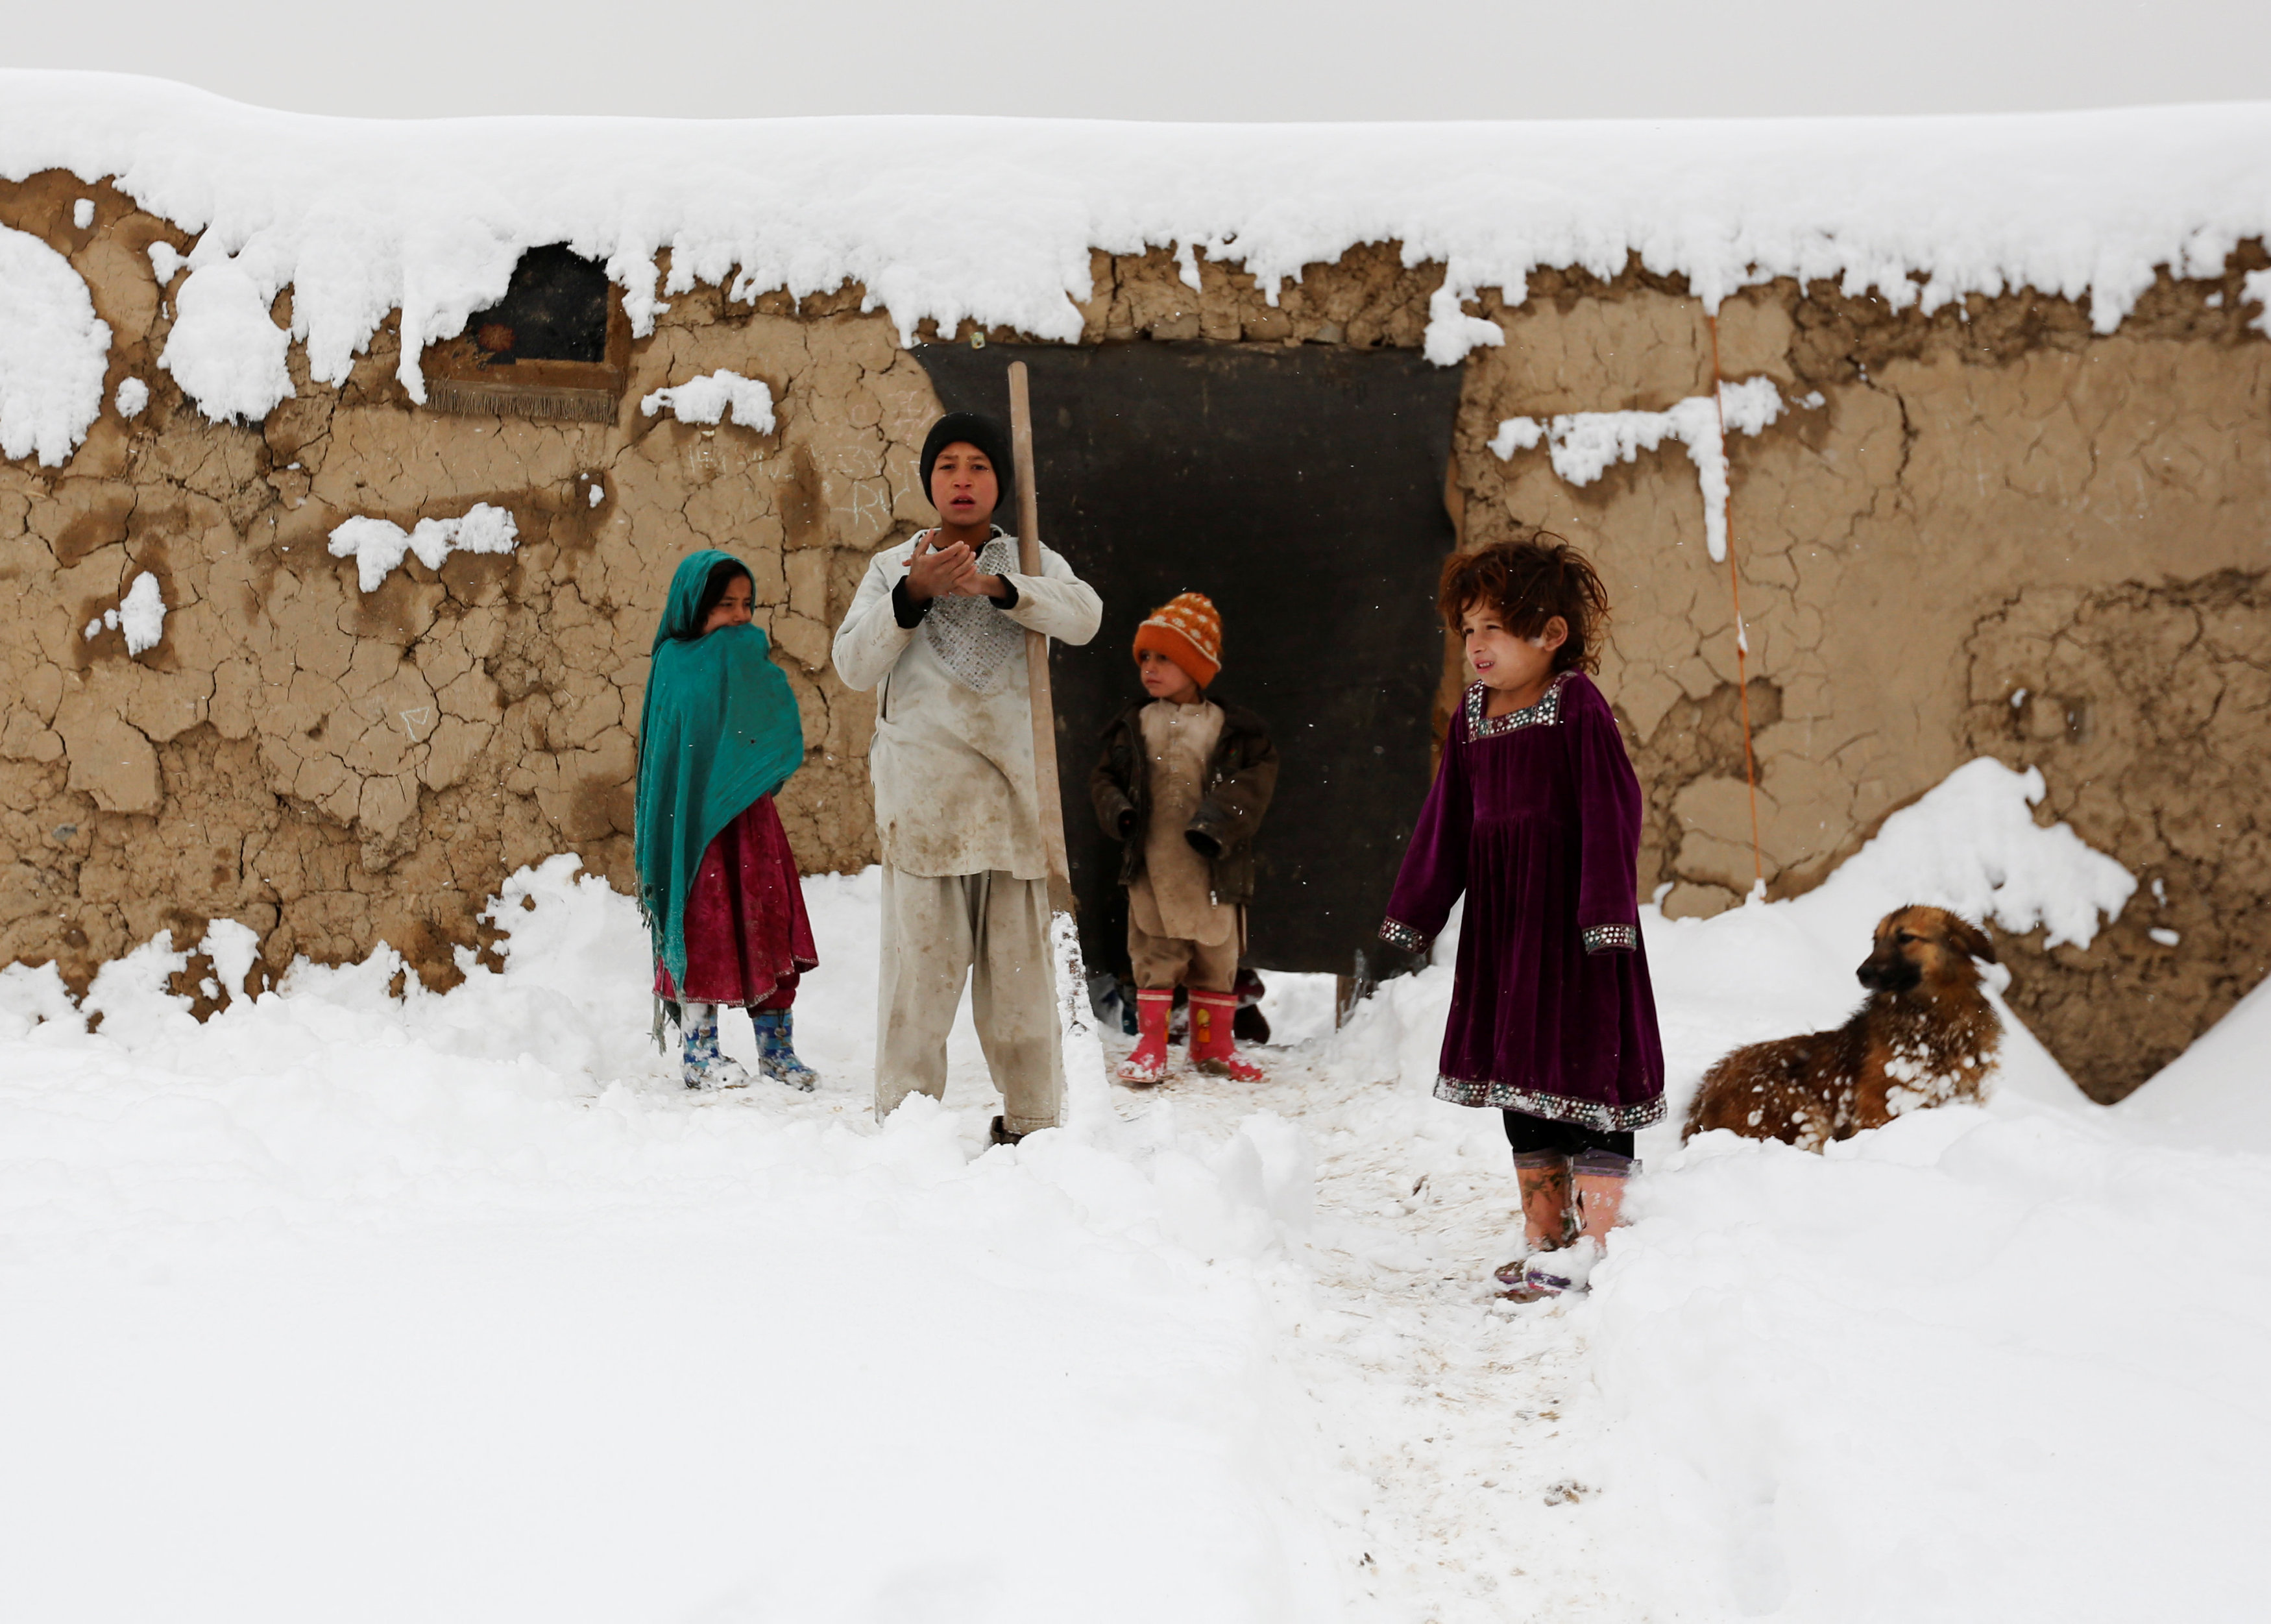 Internally displaced Afghan children stand outside their shelter during a snowfall in Kabul, Afghanistan February 5, 2017. REUTERS/Mohammad Ismail